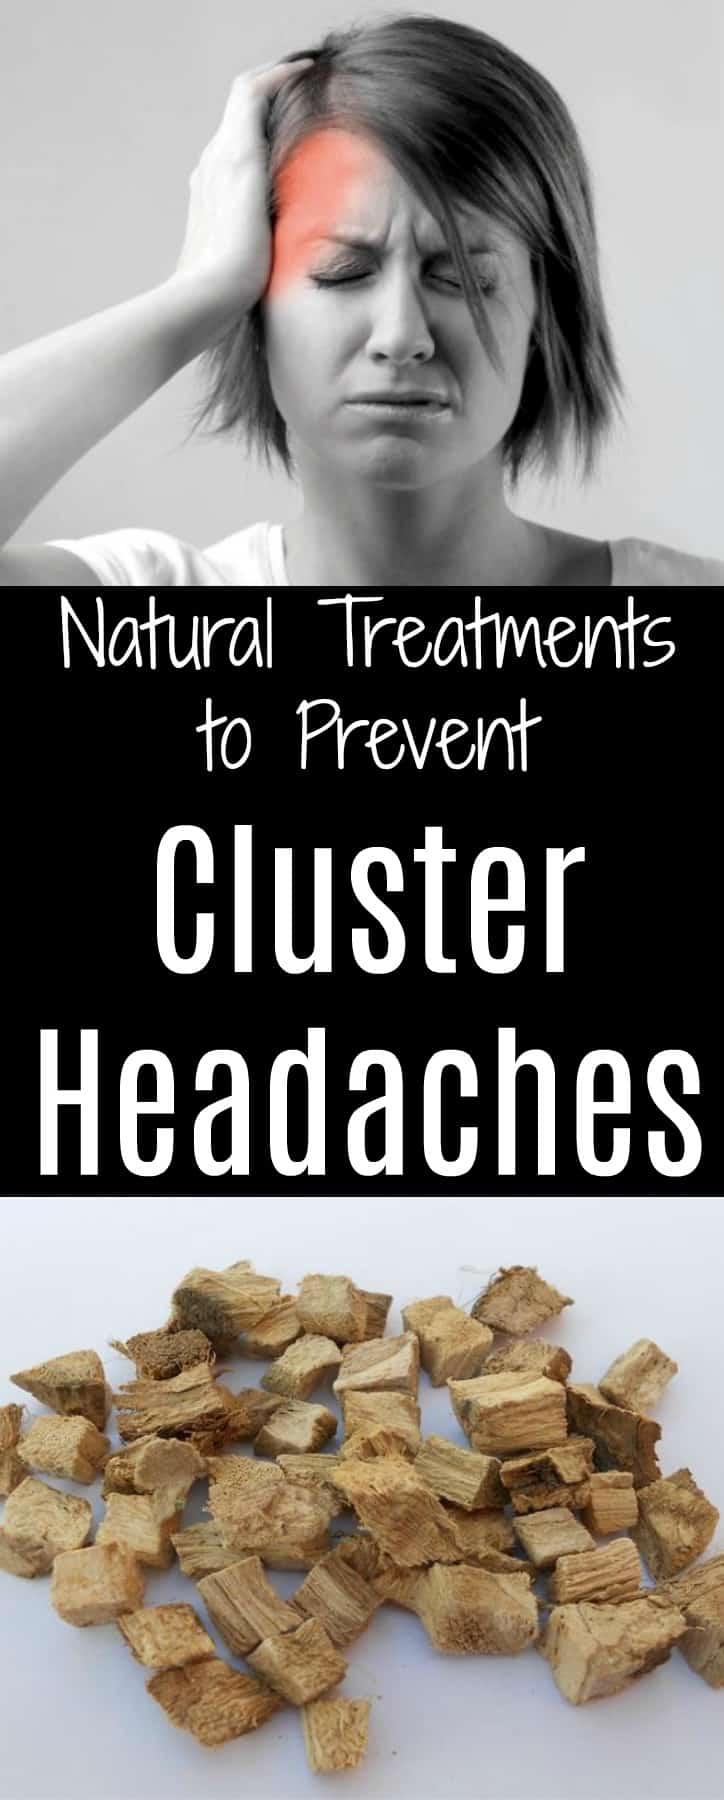 10 Natural Treatments to Prevent Cluster Headaches